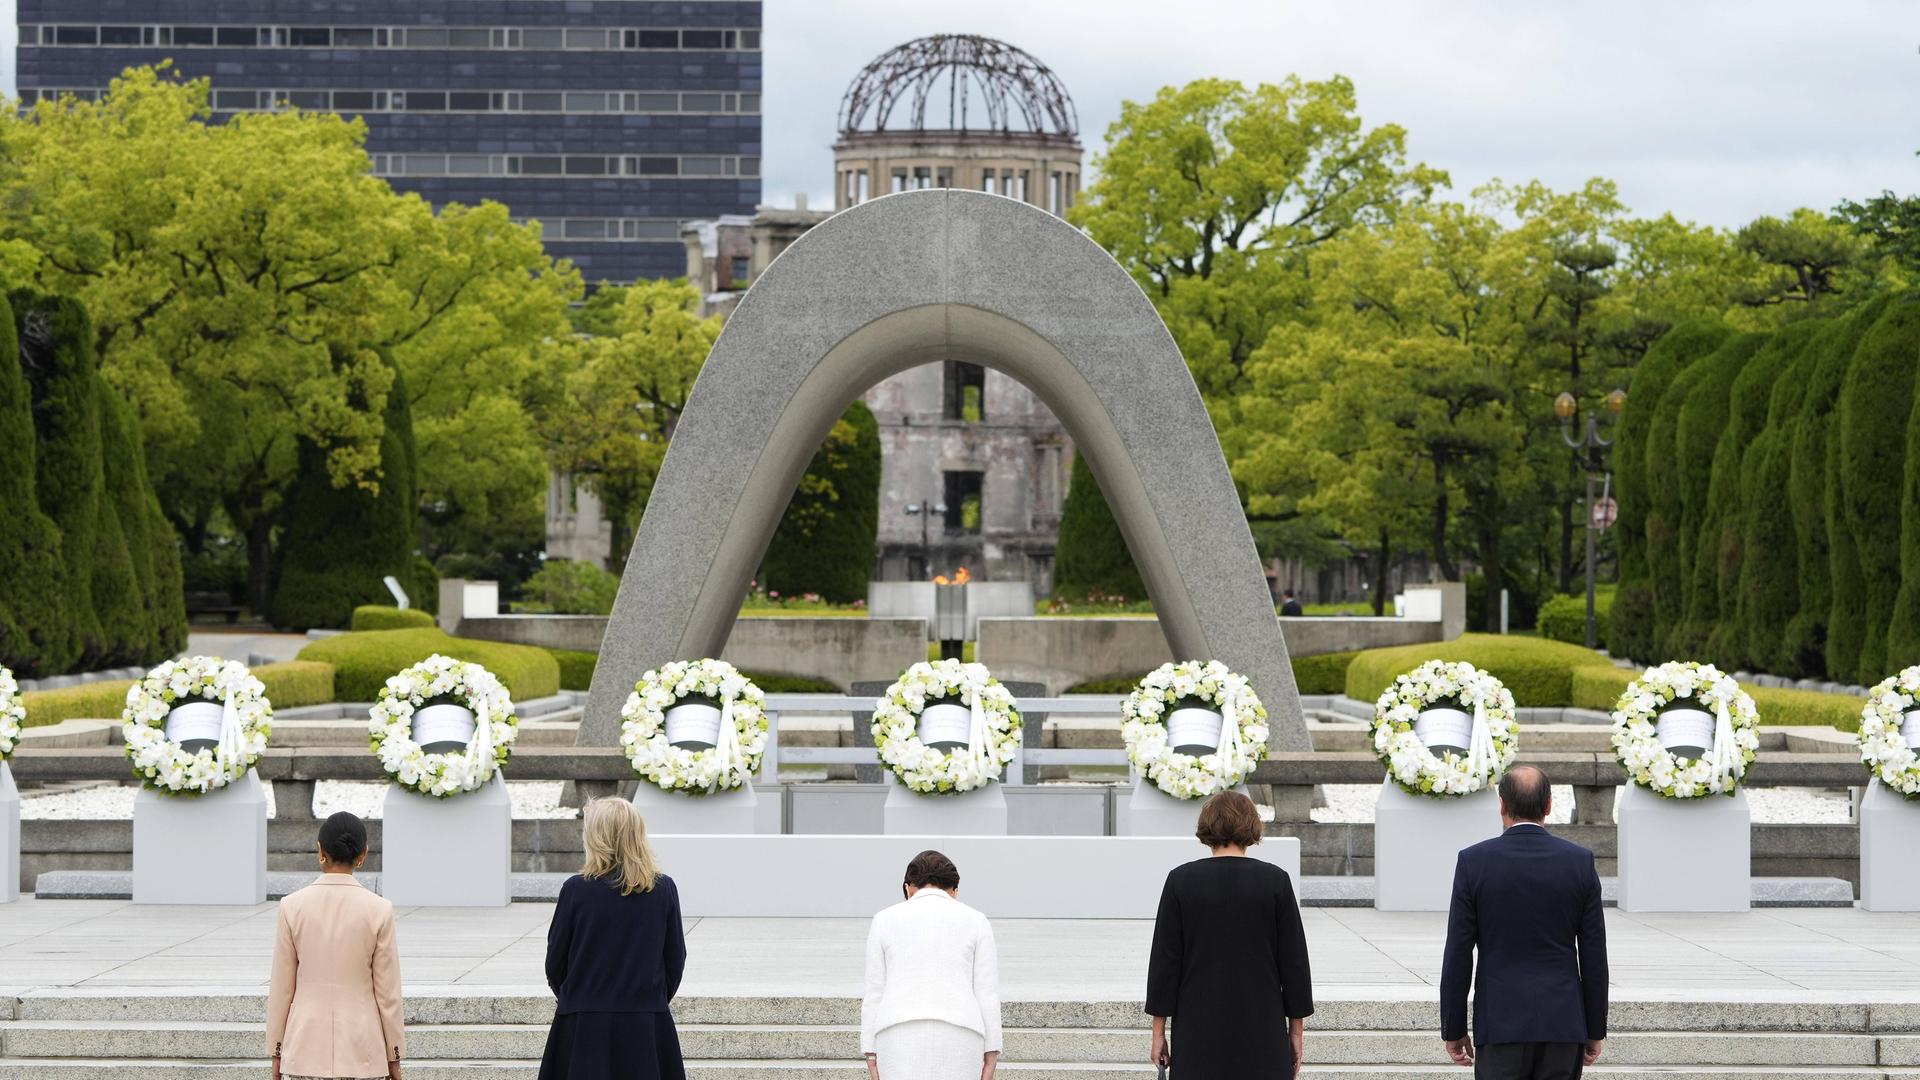 May 19, 2023, Hiroshima, Japan: L-R Wife of British Prime Minister Rishi Sunak, Akshata Murty, US First Lady Jill Biden, Japan s First Lady Yuko Kishida, wife of German Chancellor Olaf Scholz, Britta Ernst, and husband of European Commission President Ursula von der Leyen, Heiko von der Leyen, attend a flower wreath laying ceremony at the Cenotaph for Atomic Bomb Victims in the Peace Memorial Park as part of the G7 Hiroshima Summit in Hiroshima, Japan, 19 May 2023.  Franck Robichon / Pool The G7 Hiroshima Summit will be held from 19 to 21 May 2023. Hiroshima Japan - ZUMAz114 20230519_zih_z114_049 Copyright: xPOOLx